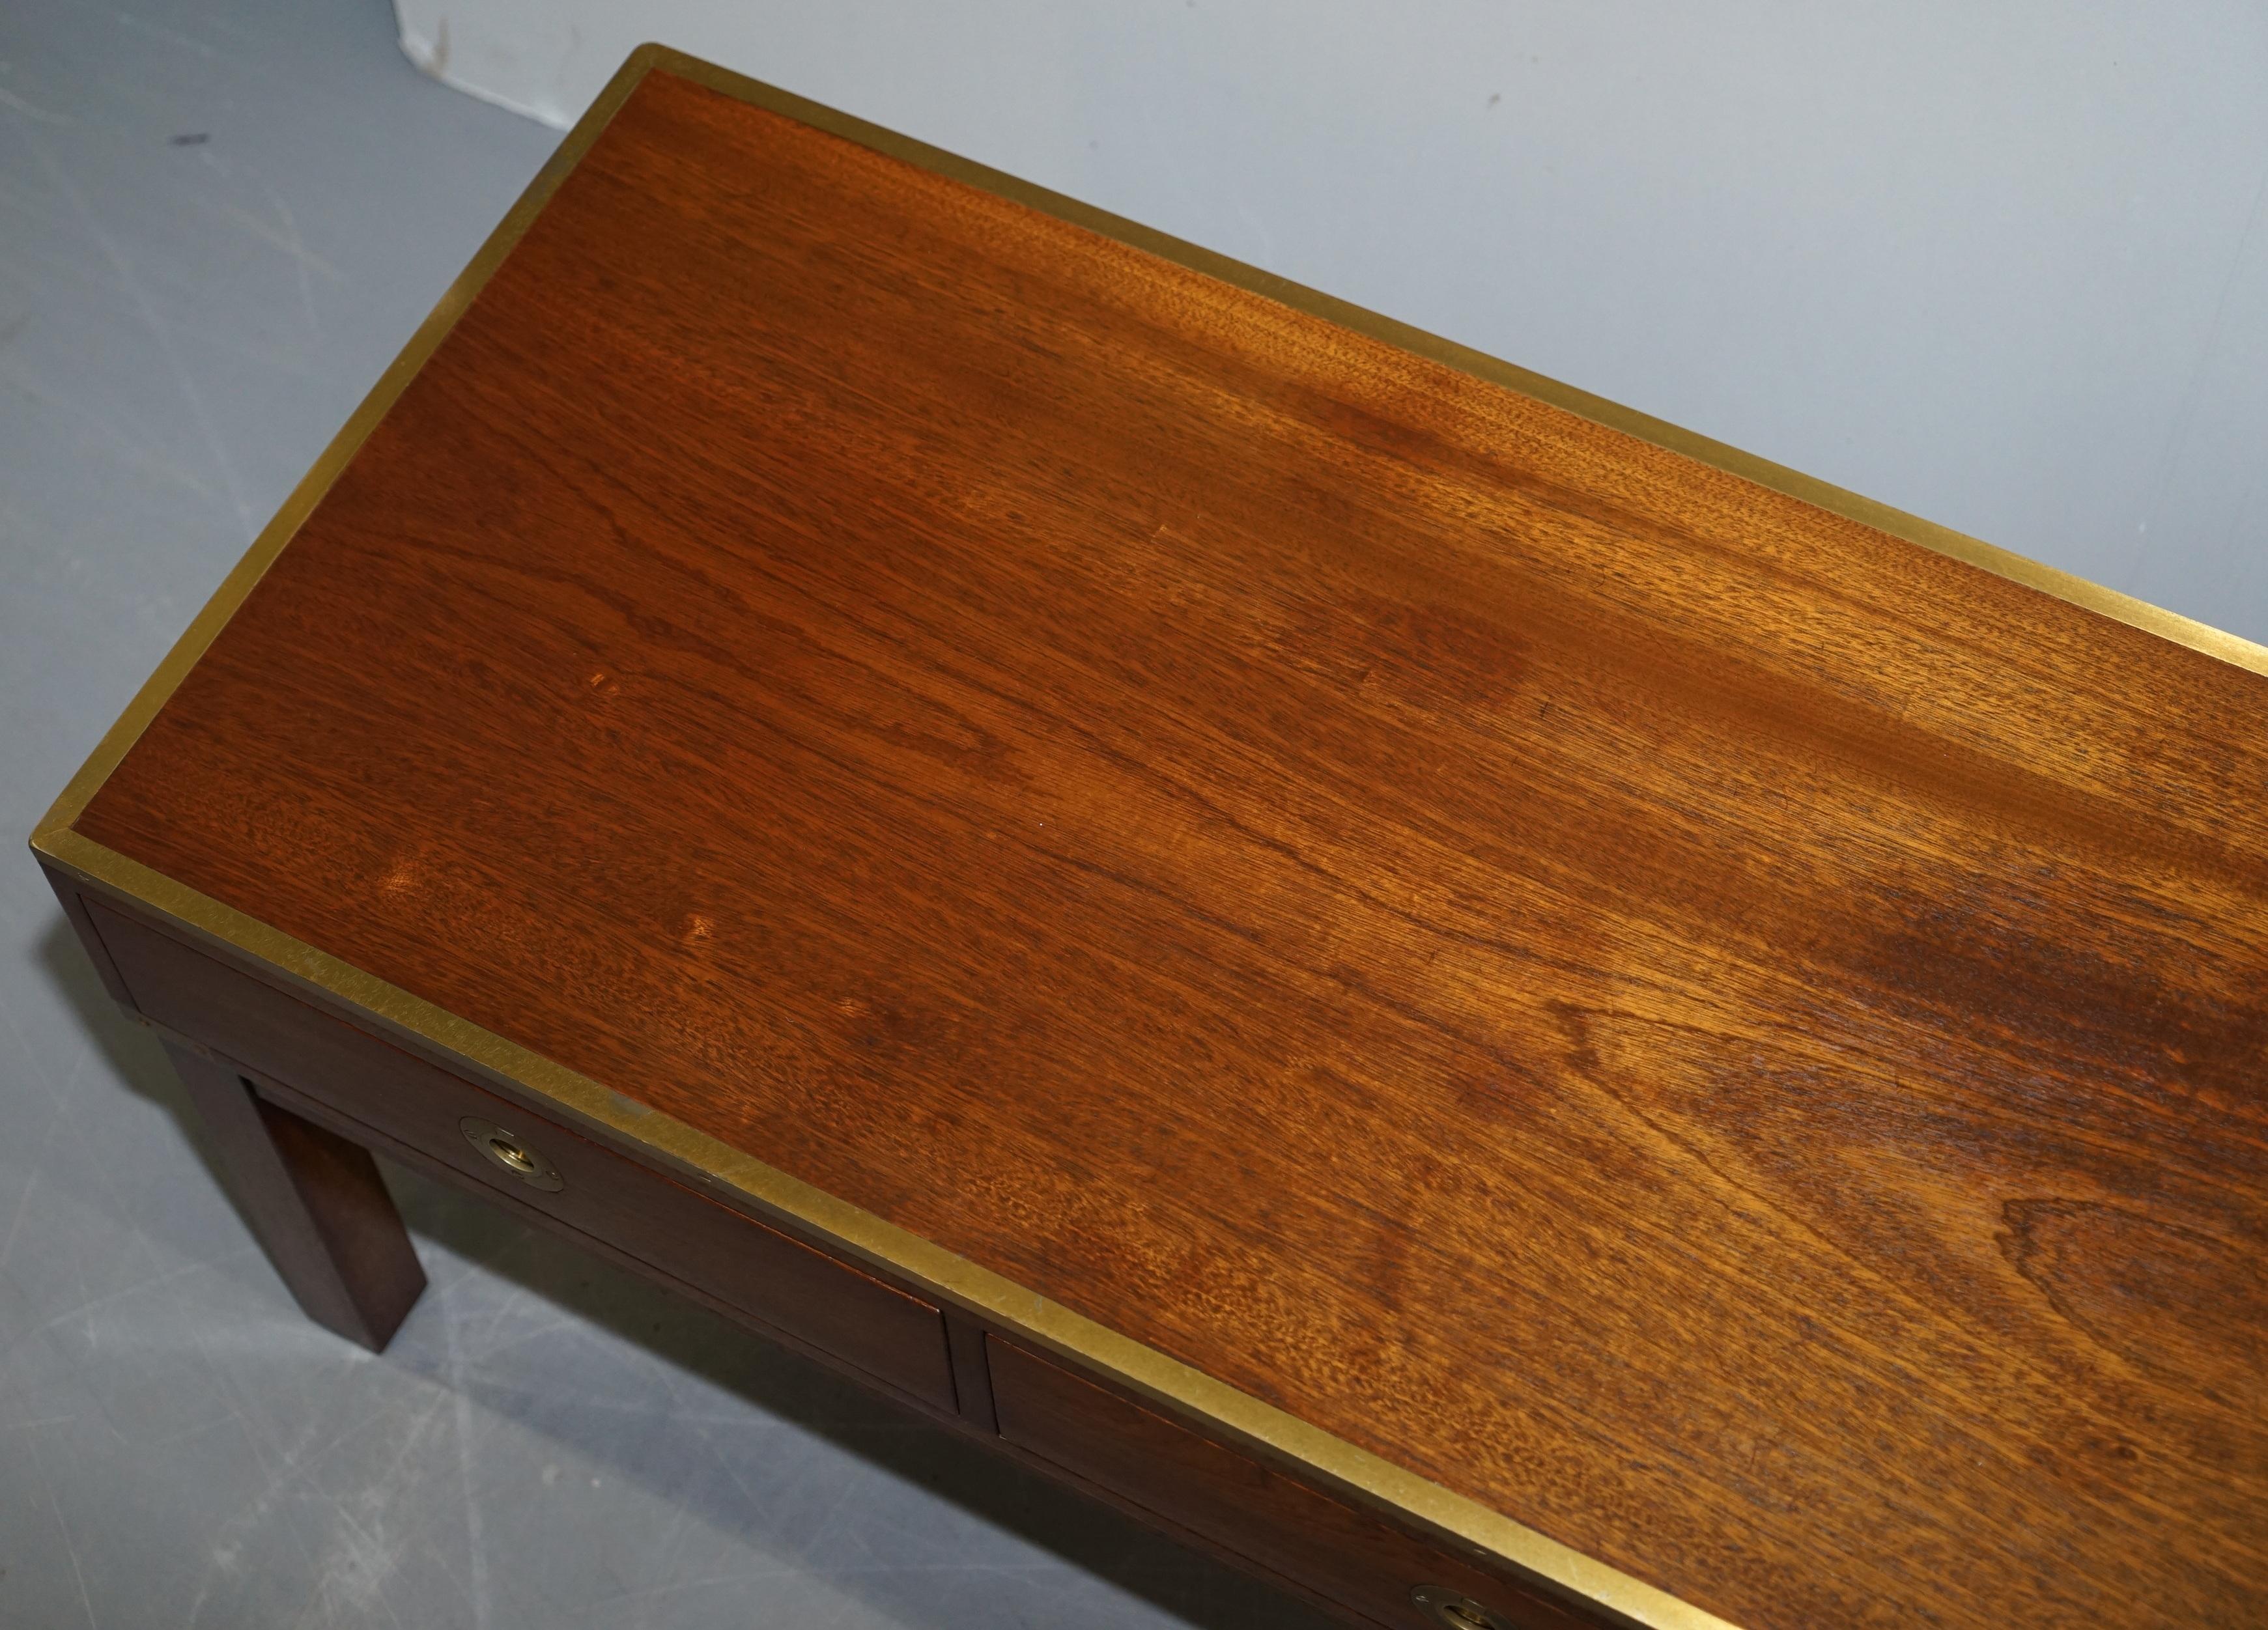 Harrods Kennedy Military Campaign Hardwood Coffee Table Part of Large Suite 2